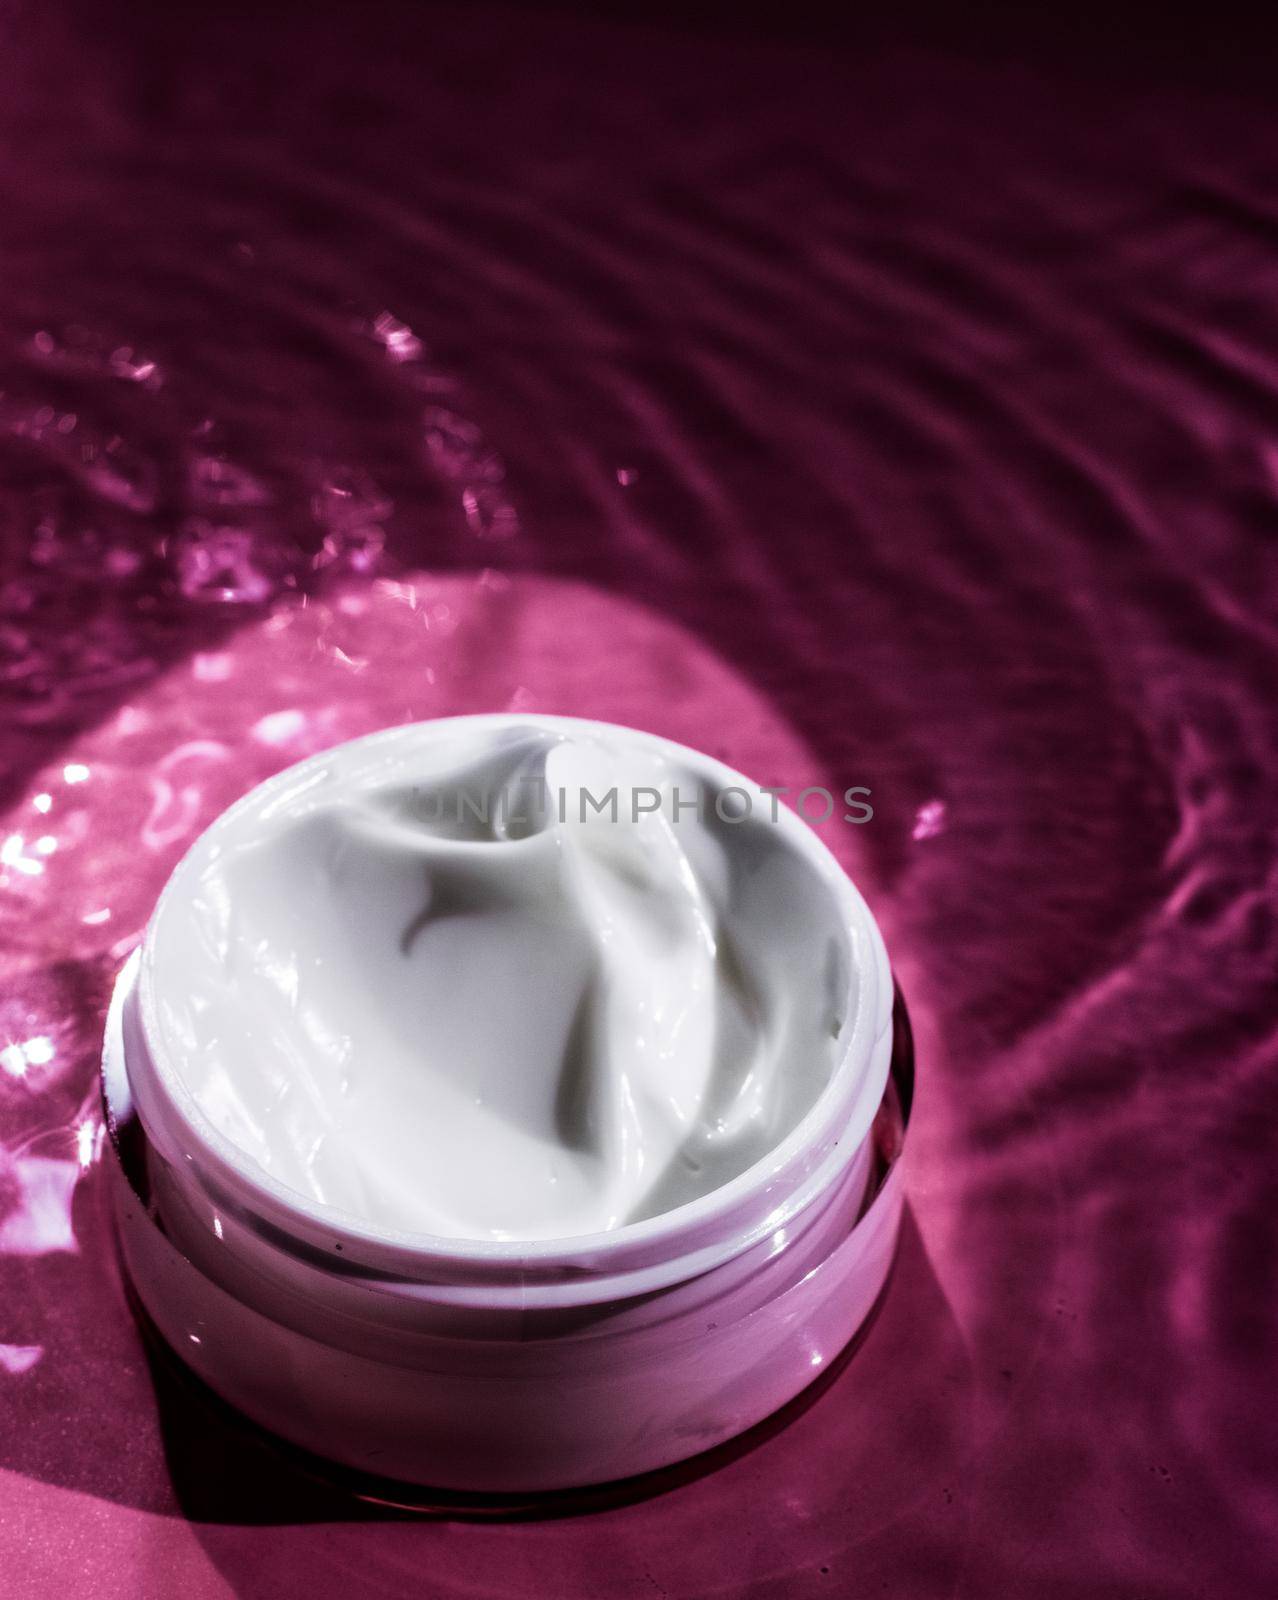 beauty cream, luxury cosmetic product - skin and body care styled concept